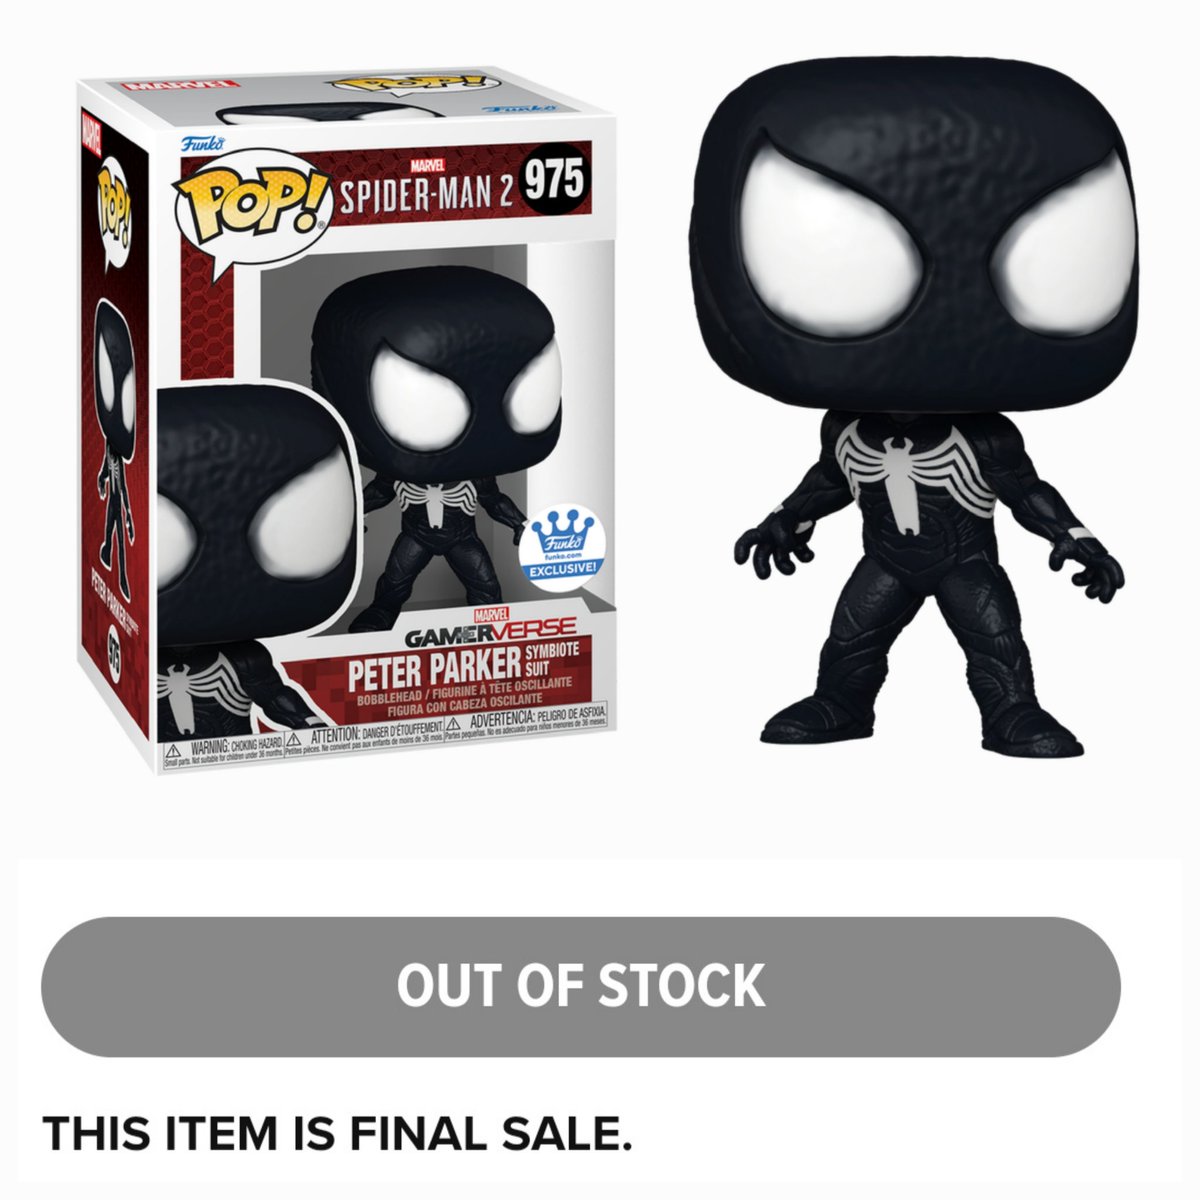 Spider-Man has sold out but us going in and out of stock, keep refreshing if you missed it!

Did you get one?
-
#funko #funkopop #funkopopcollection #funkopops #funkocollector #anime #manga #funkofamily #skittlerampage 
#Spiderman #venom #symbiote #Marvel #Spiderman2